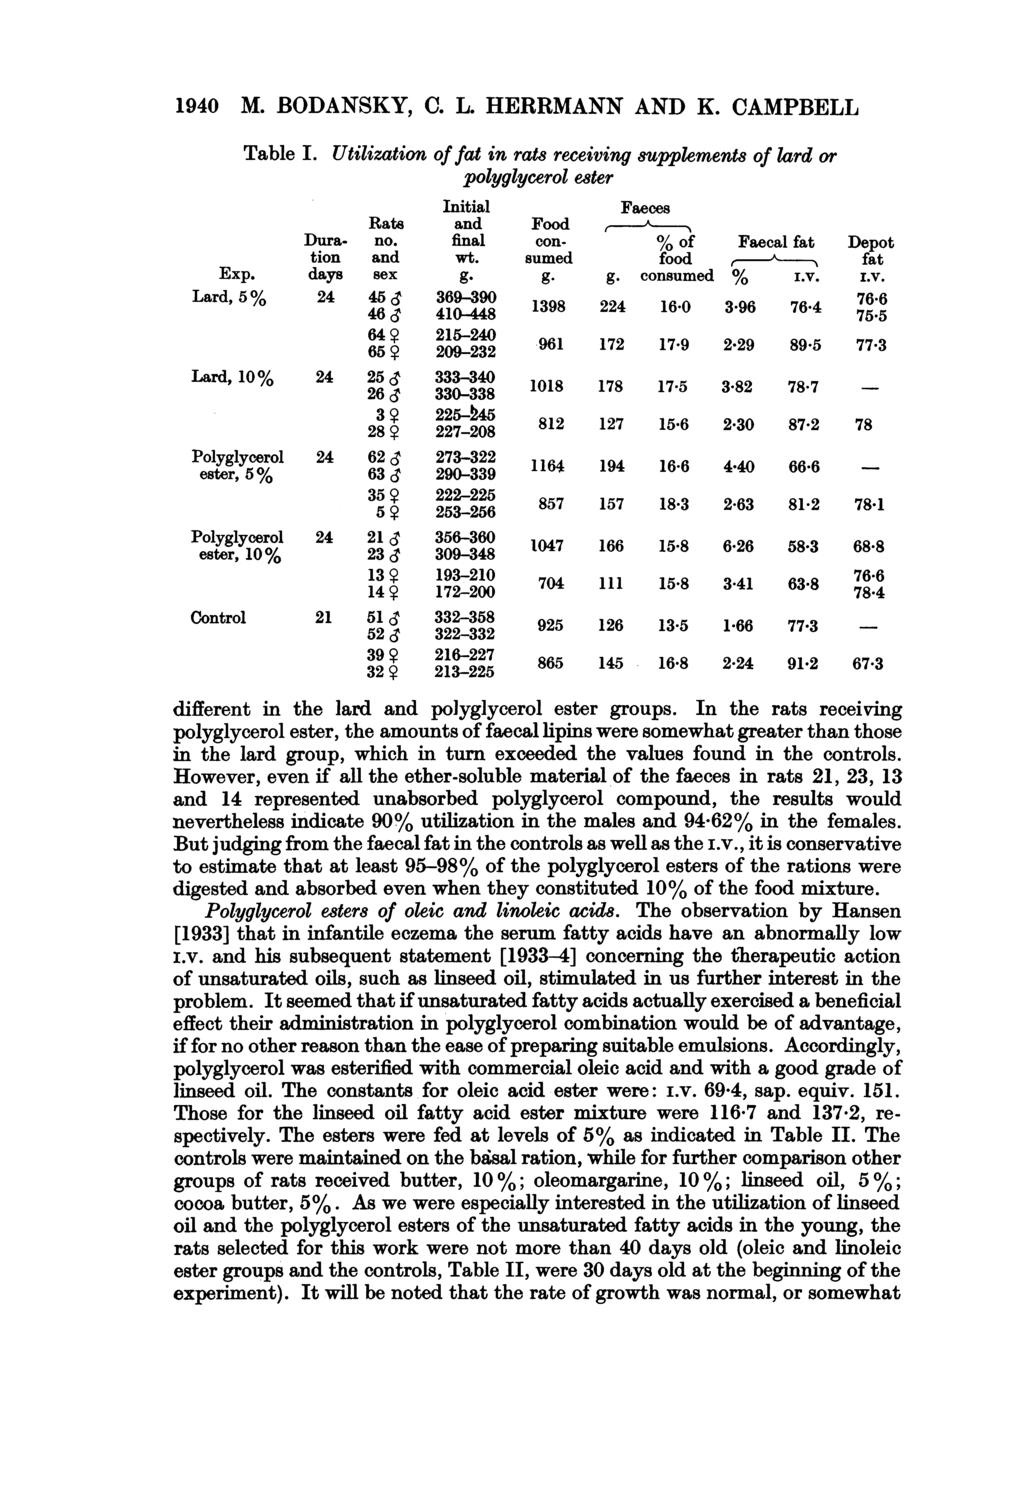 1940 M. BODANSKY, C. L. HERRMANN AND K. CAMPBELL Table I. Utilization of fat in rats receiving supplements of lard or polyglycerol ester Initial Faeces Rats and Food A Dura. no.